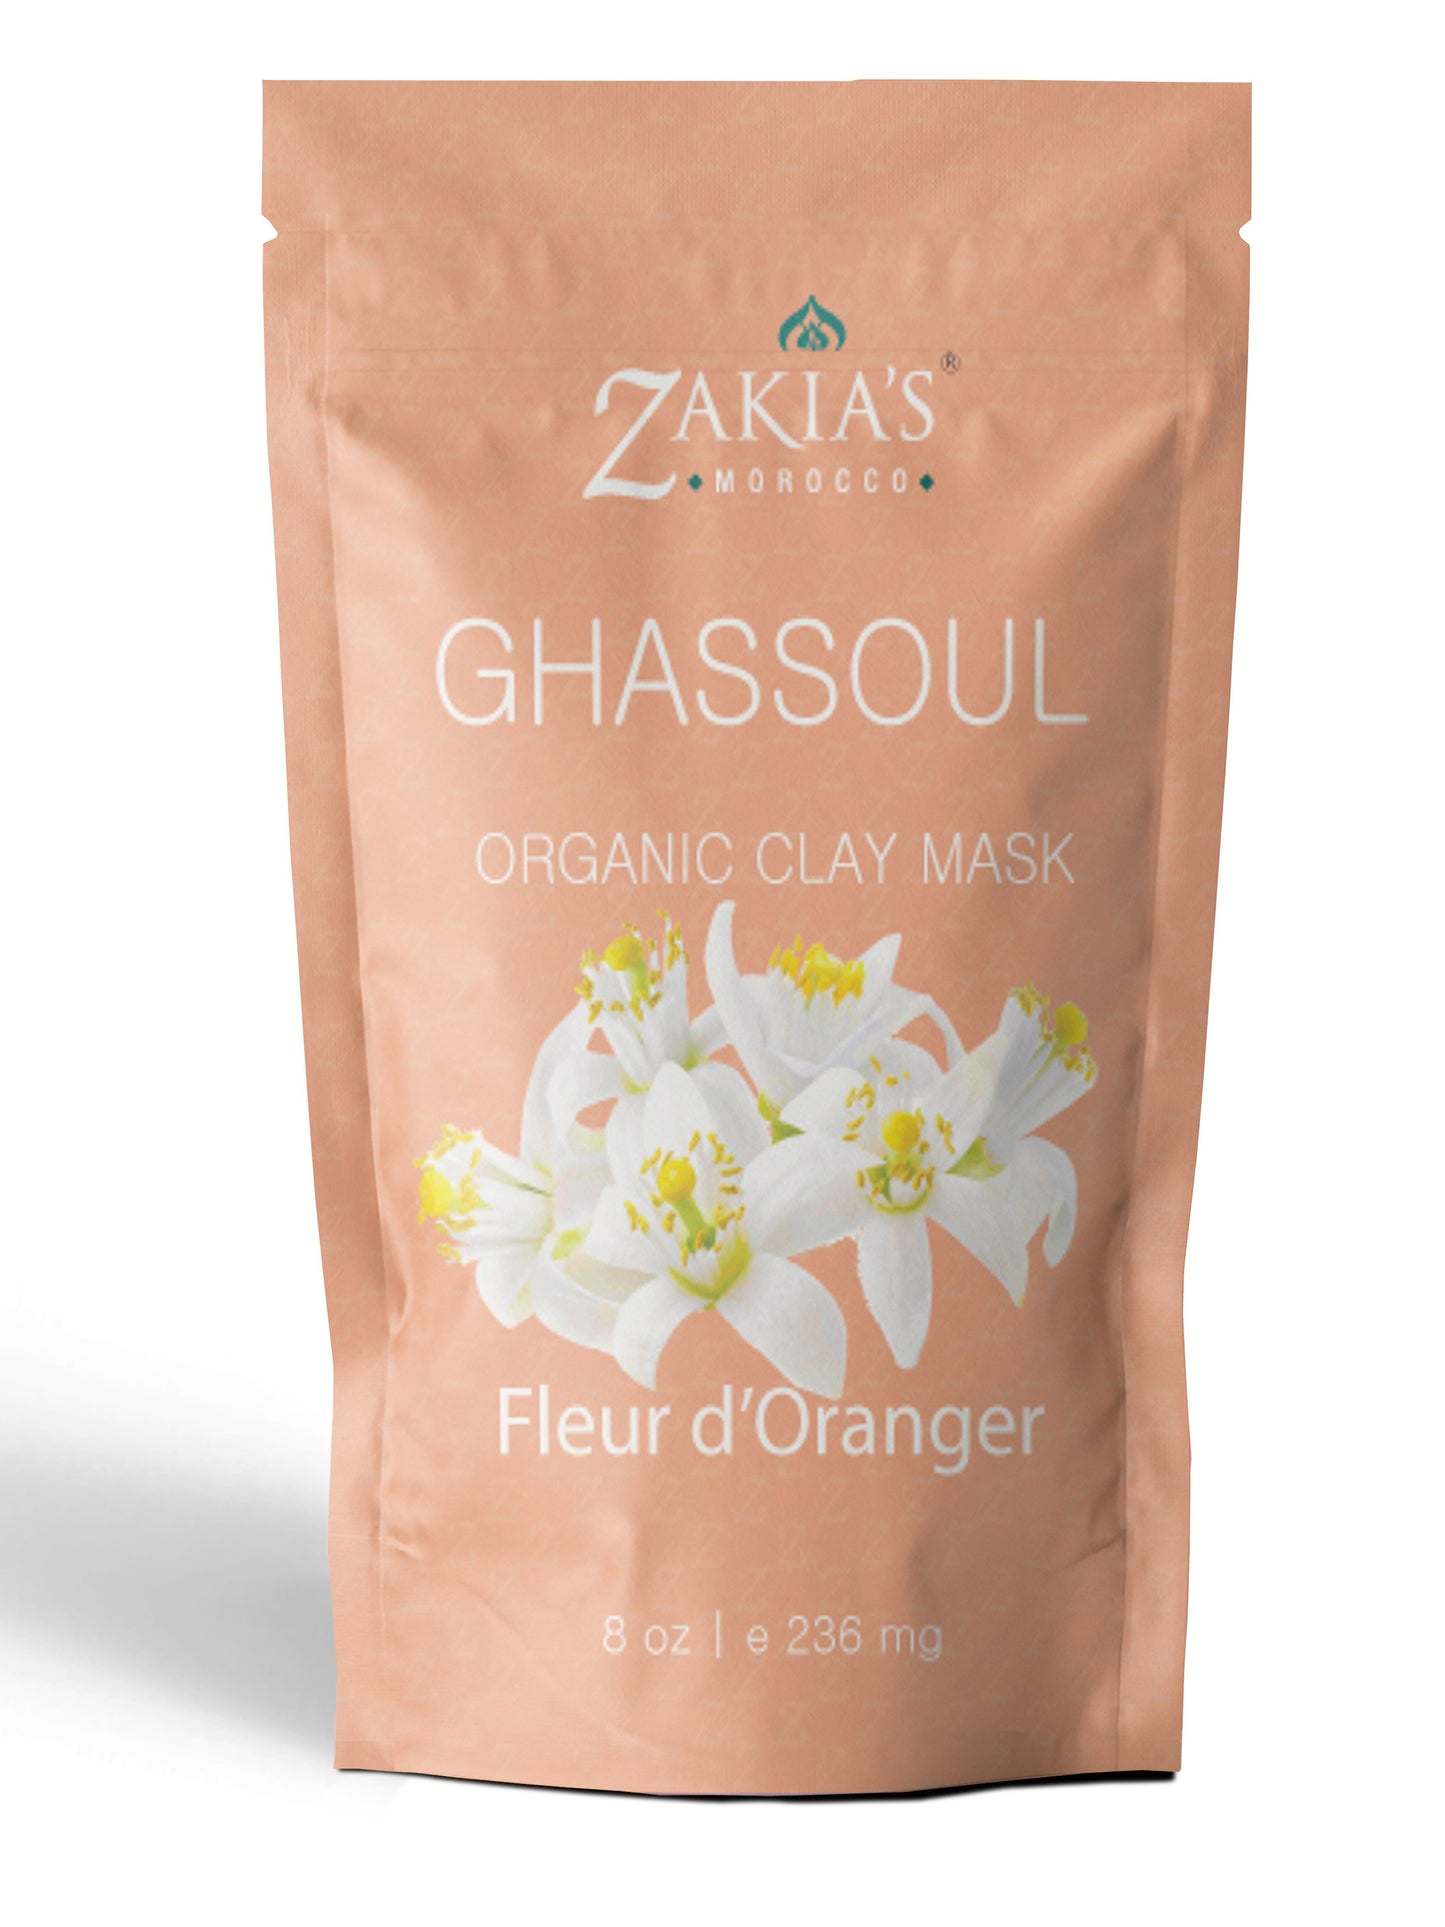 Organic Moroccan Ghassoul "Rhassoul" Clay Face and Hair Mask - Orange Blossom - 8 oz.